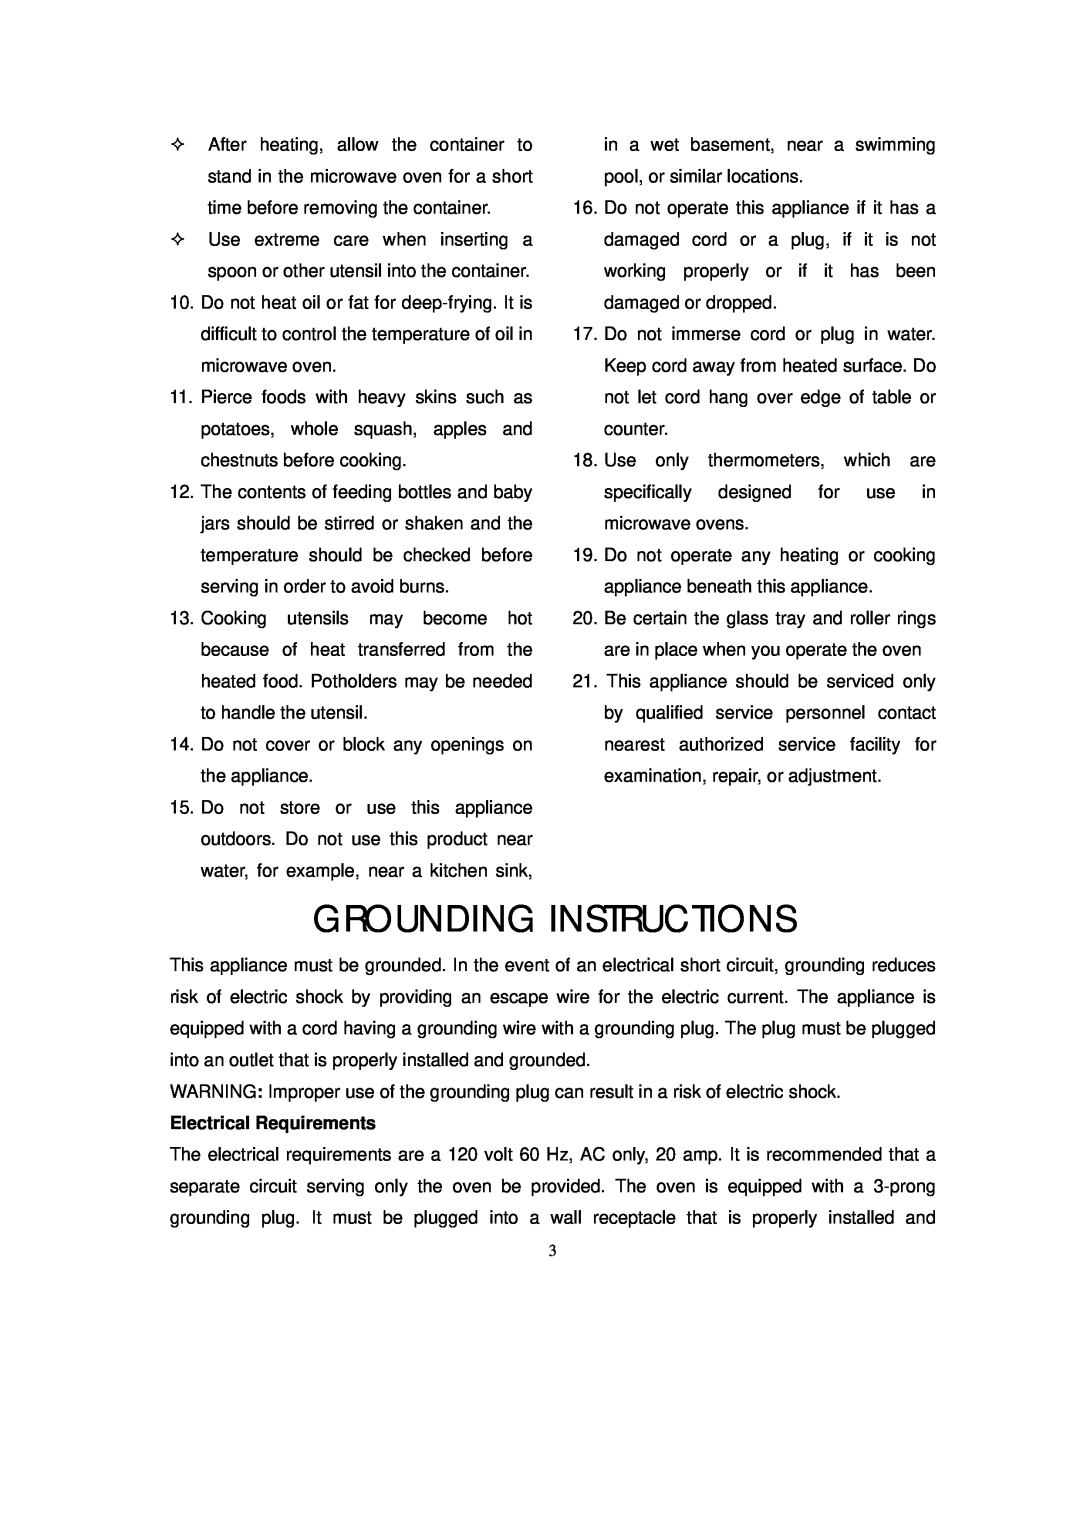 RCA RMW953 warranty Grounding Instructions, Electrical Requirements 